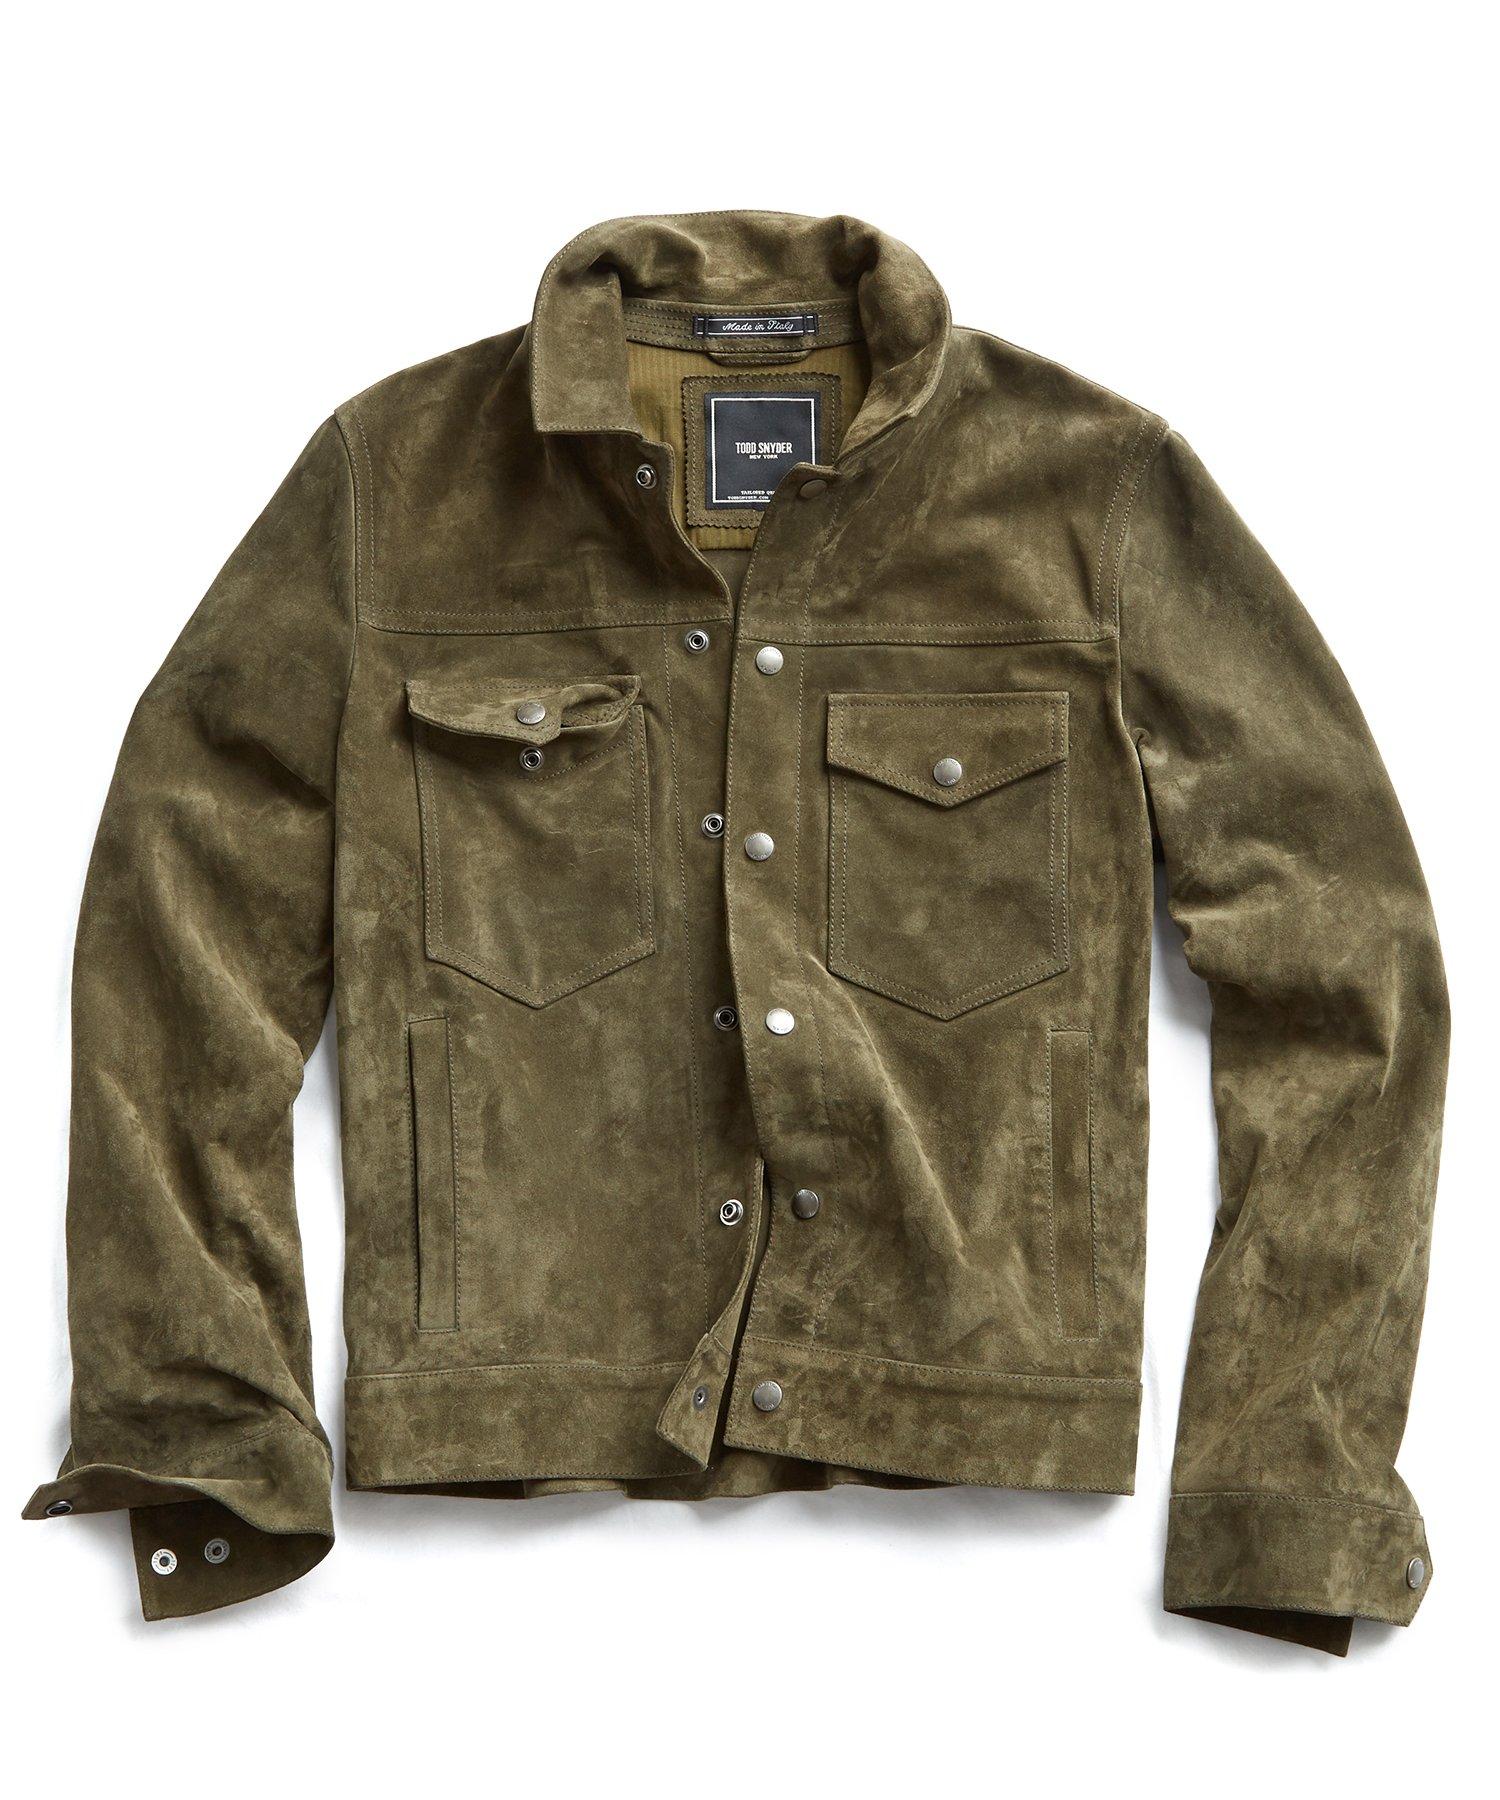 Todd Snyder Italian Suede Snap Dylan Jacket in Sage (Green) for Men - Lyst